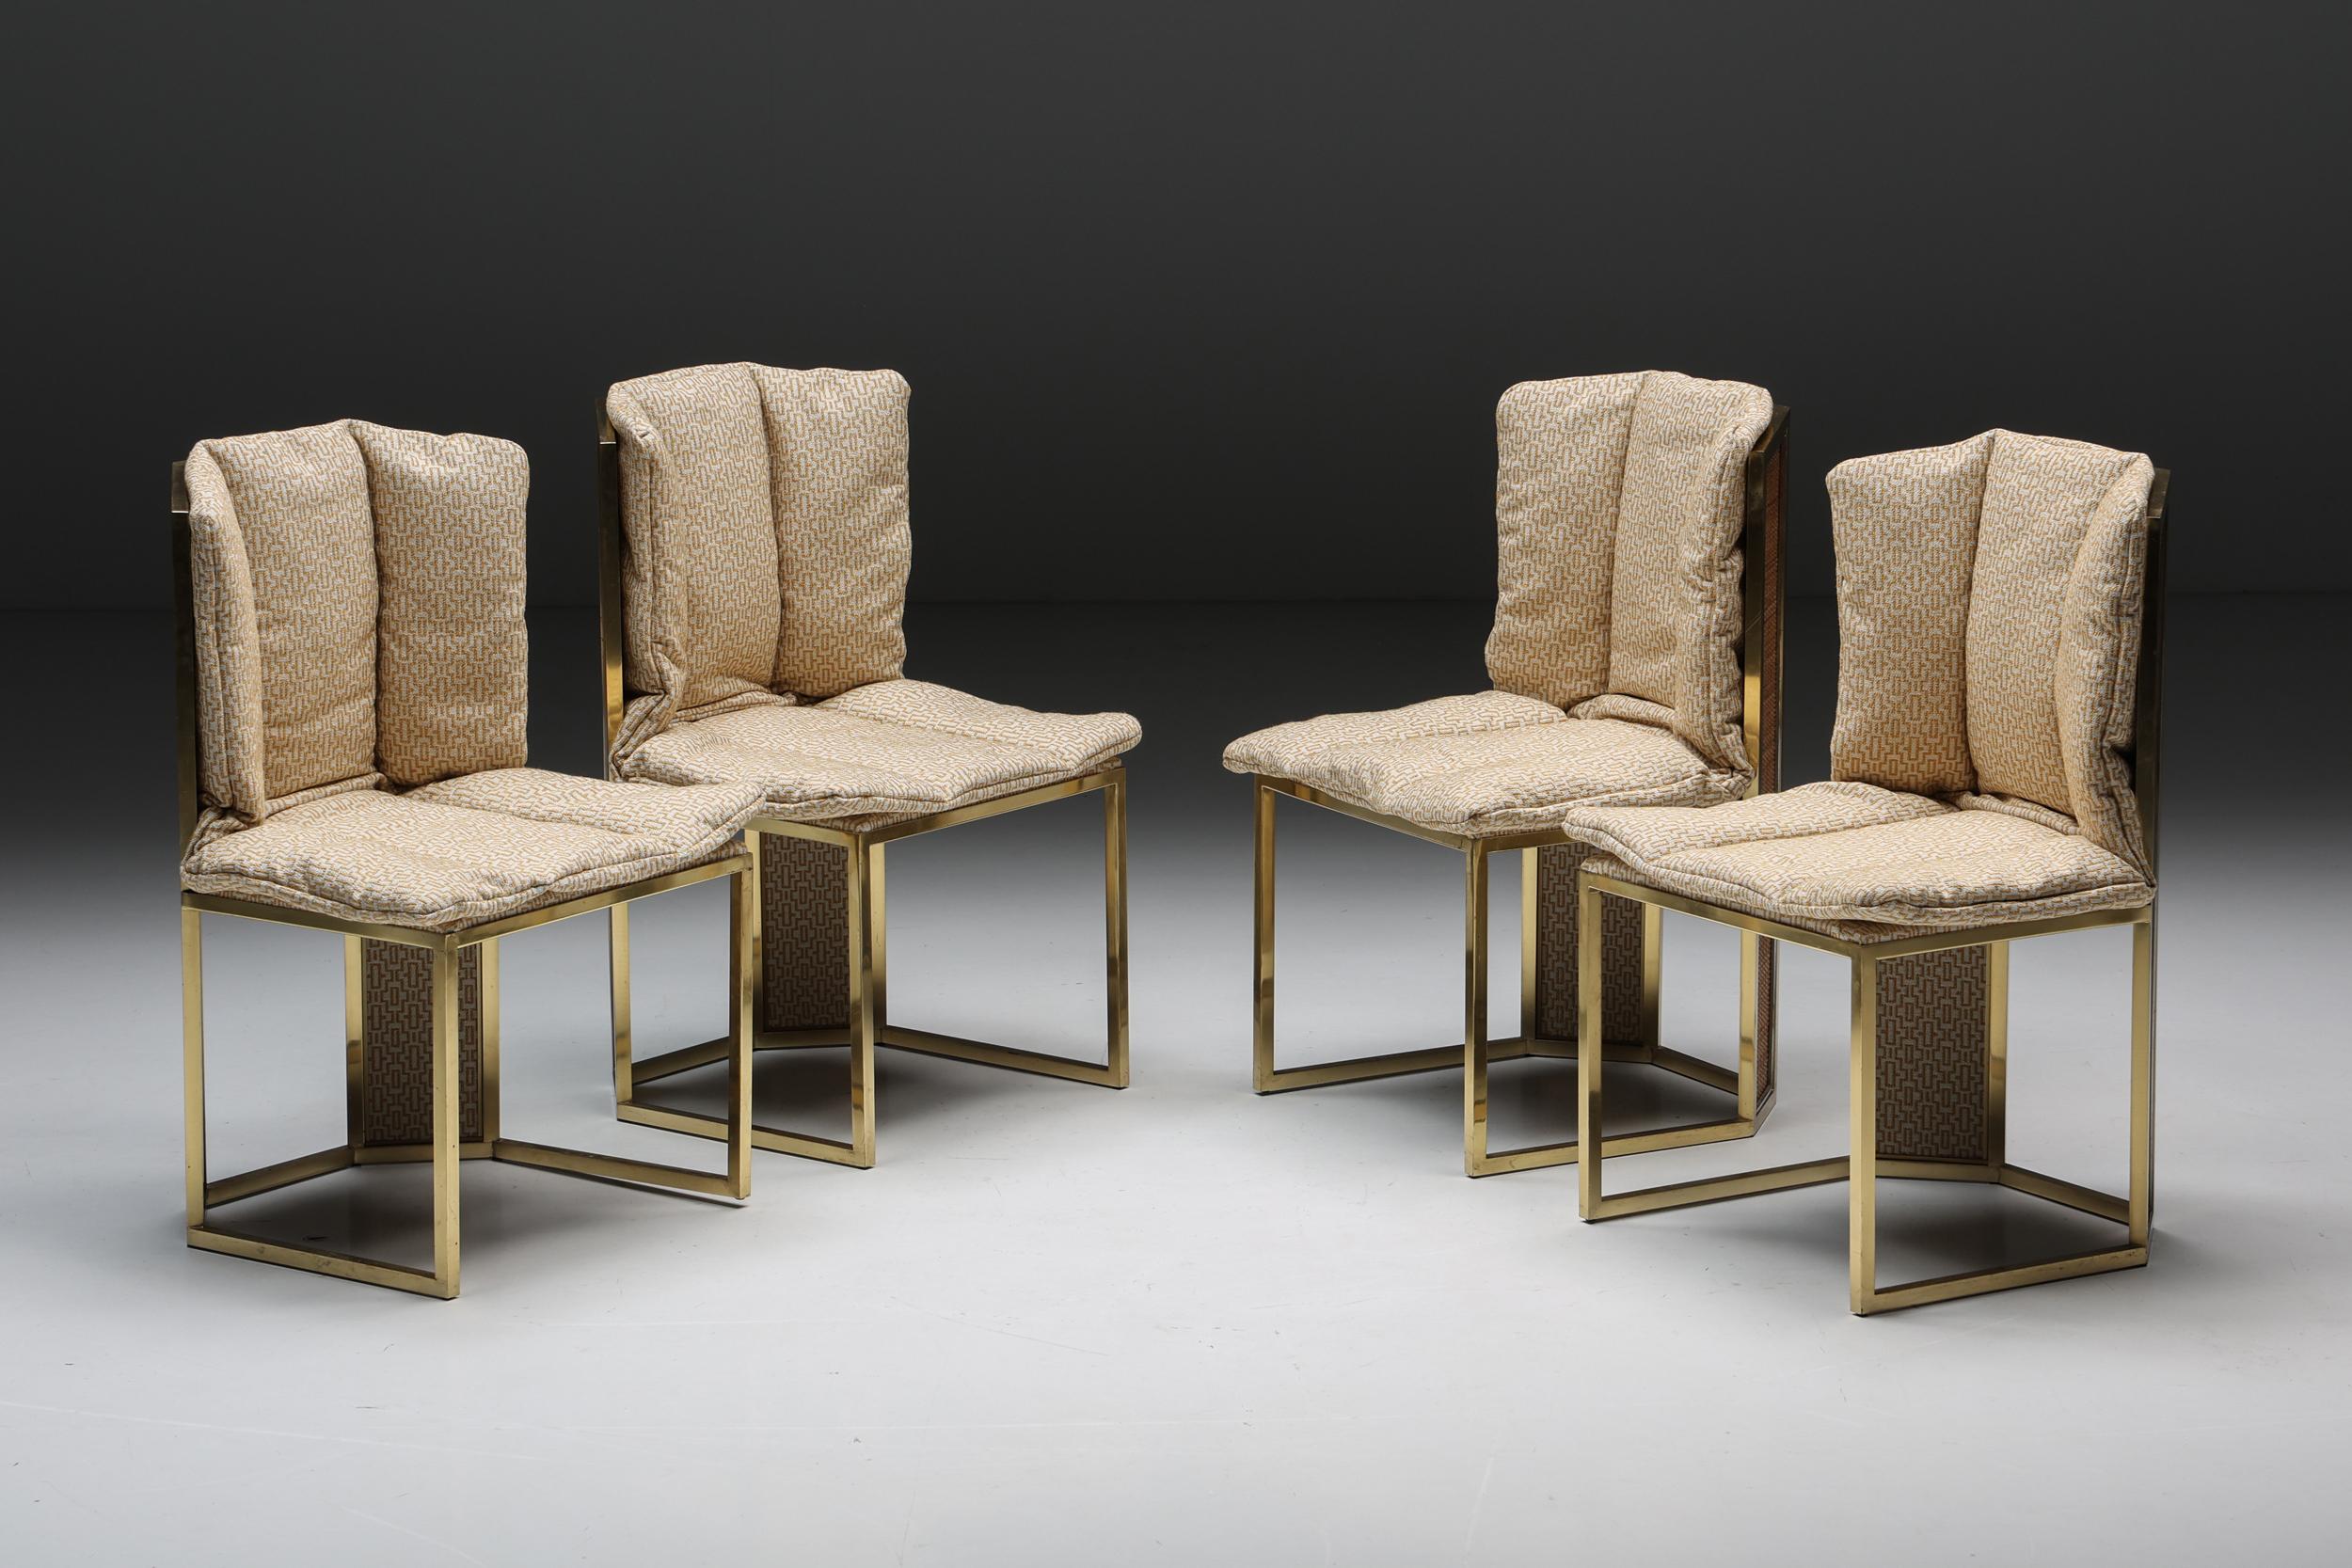 Dining chairs by Romeo Rega, a true embodiment of 1970s Italian craftsmanship. Mirroring the materials of our matching octagonal dining table, these chairs feature vintage polished brass and chrome-plated accents, seamlessly blending opulence and